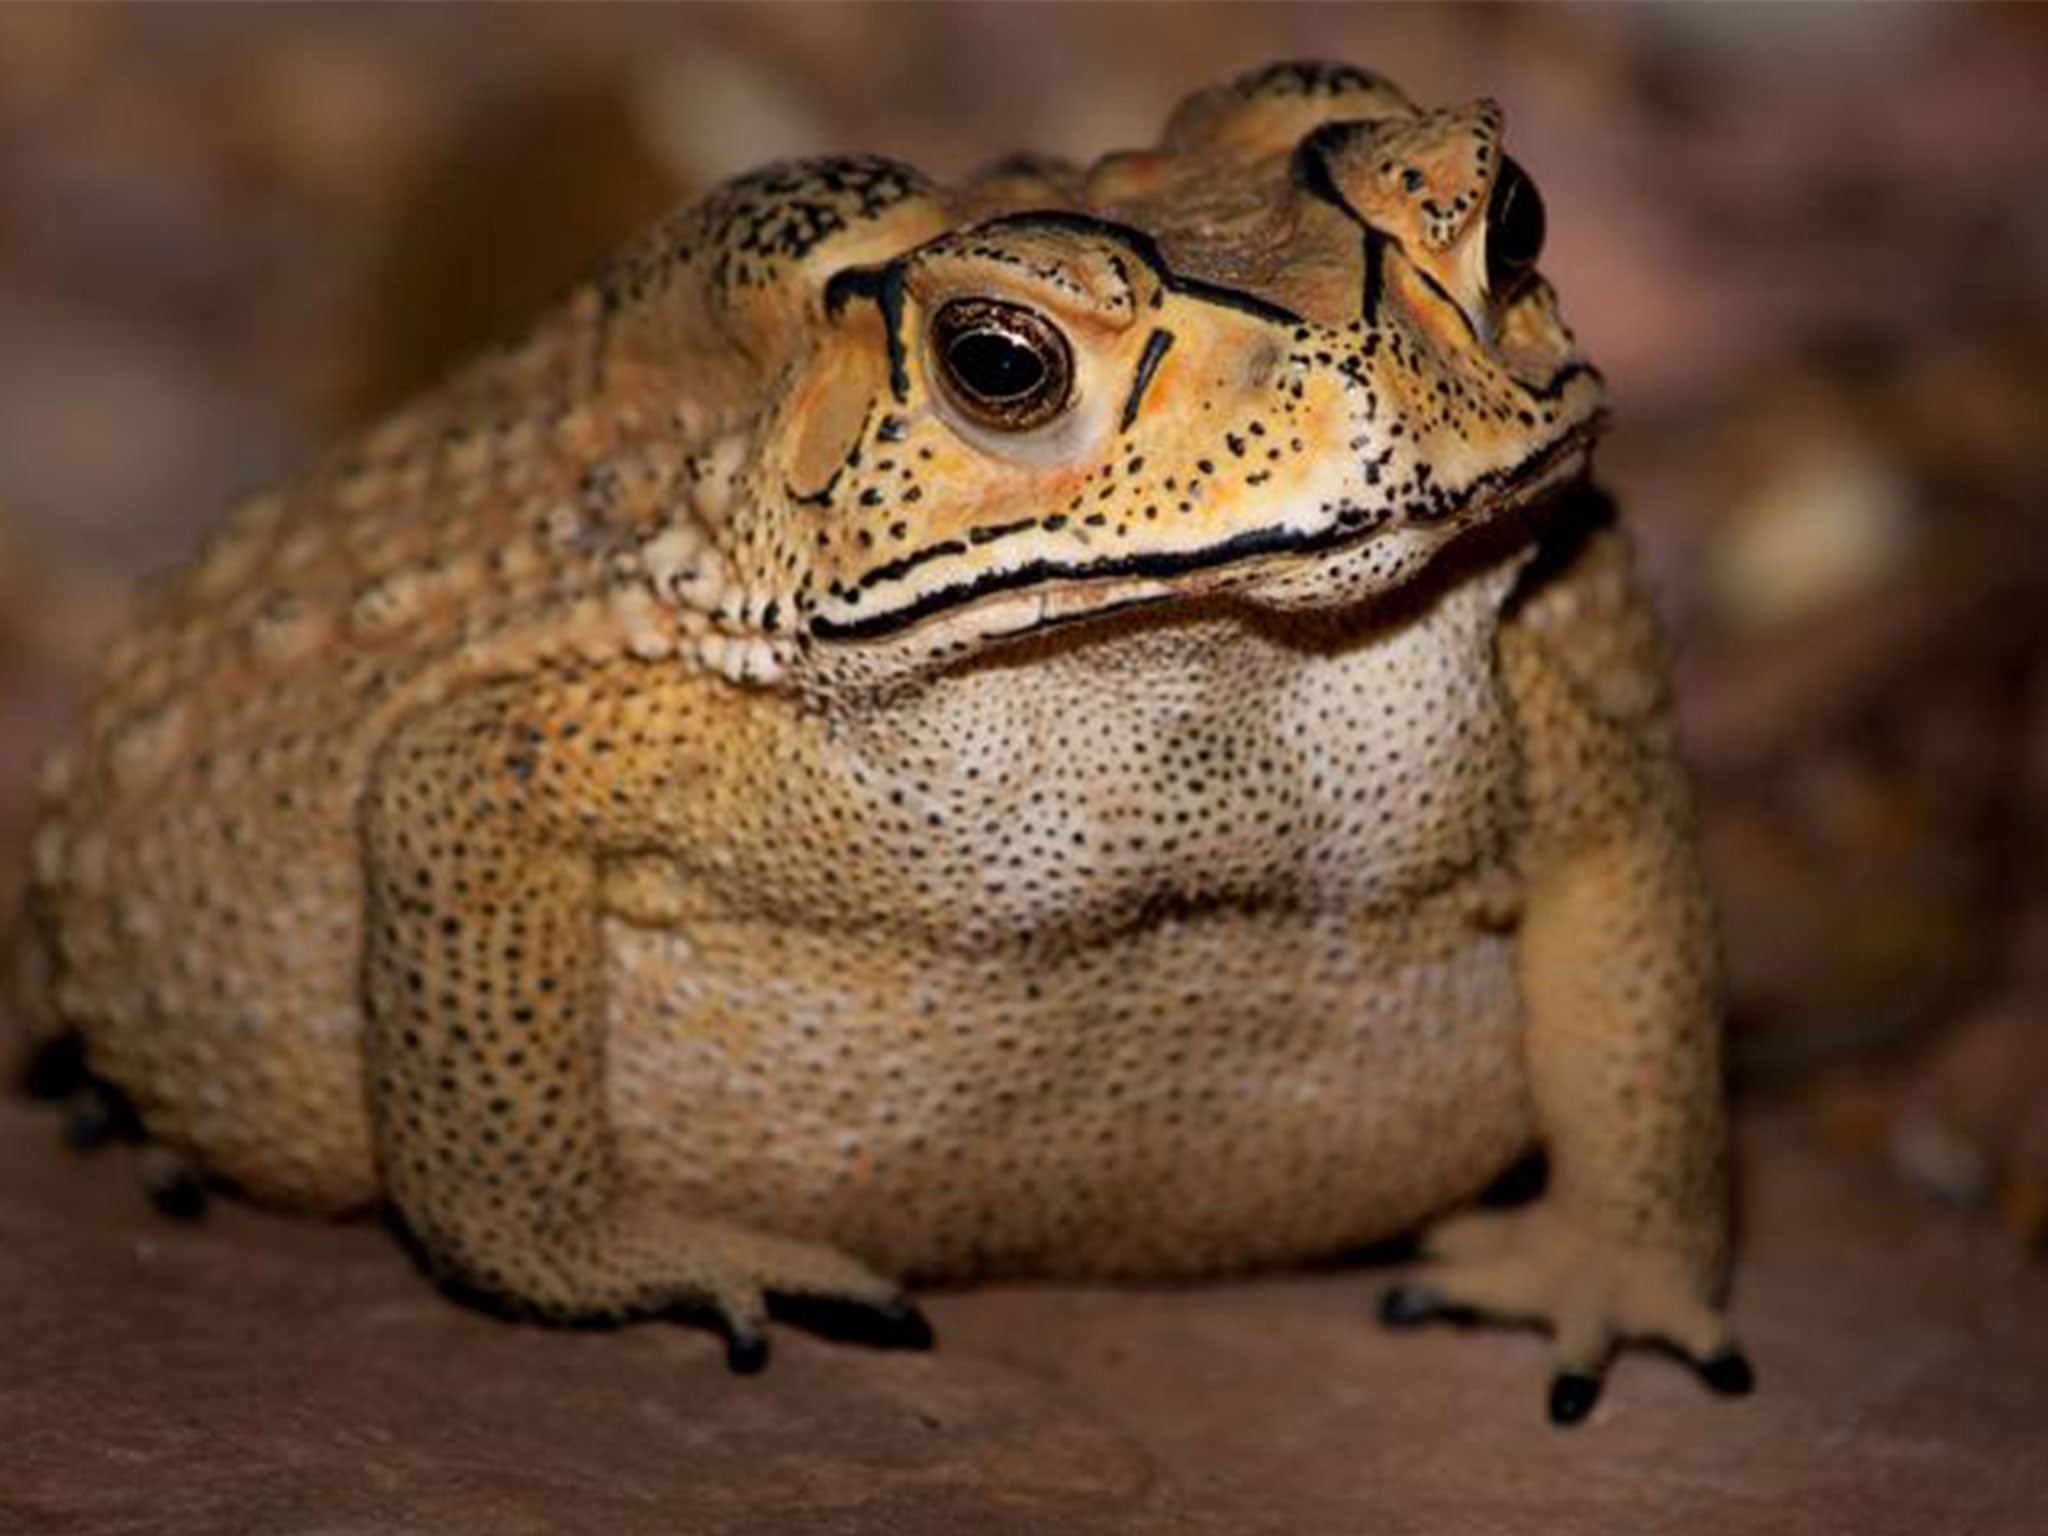 The Asian common toad is toxic to all native predators on Madagascar